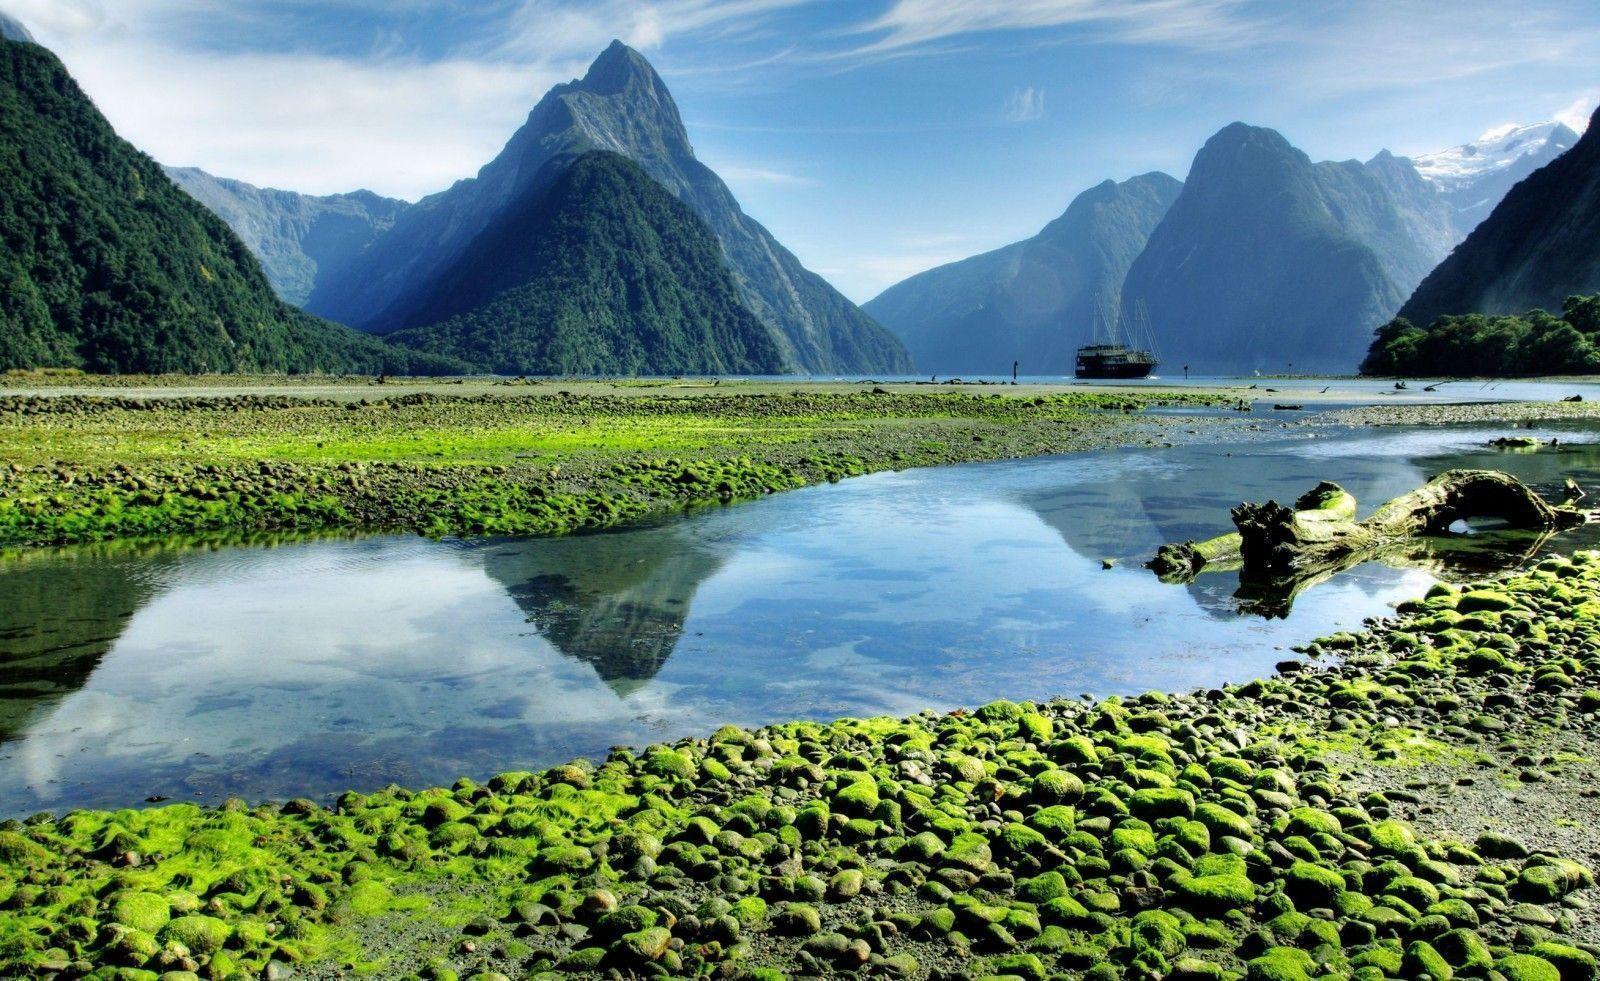 Milford Sound. Mountain views. Picture. Himalayas. Adventure